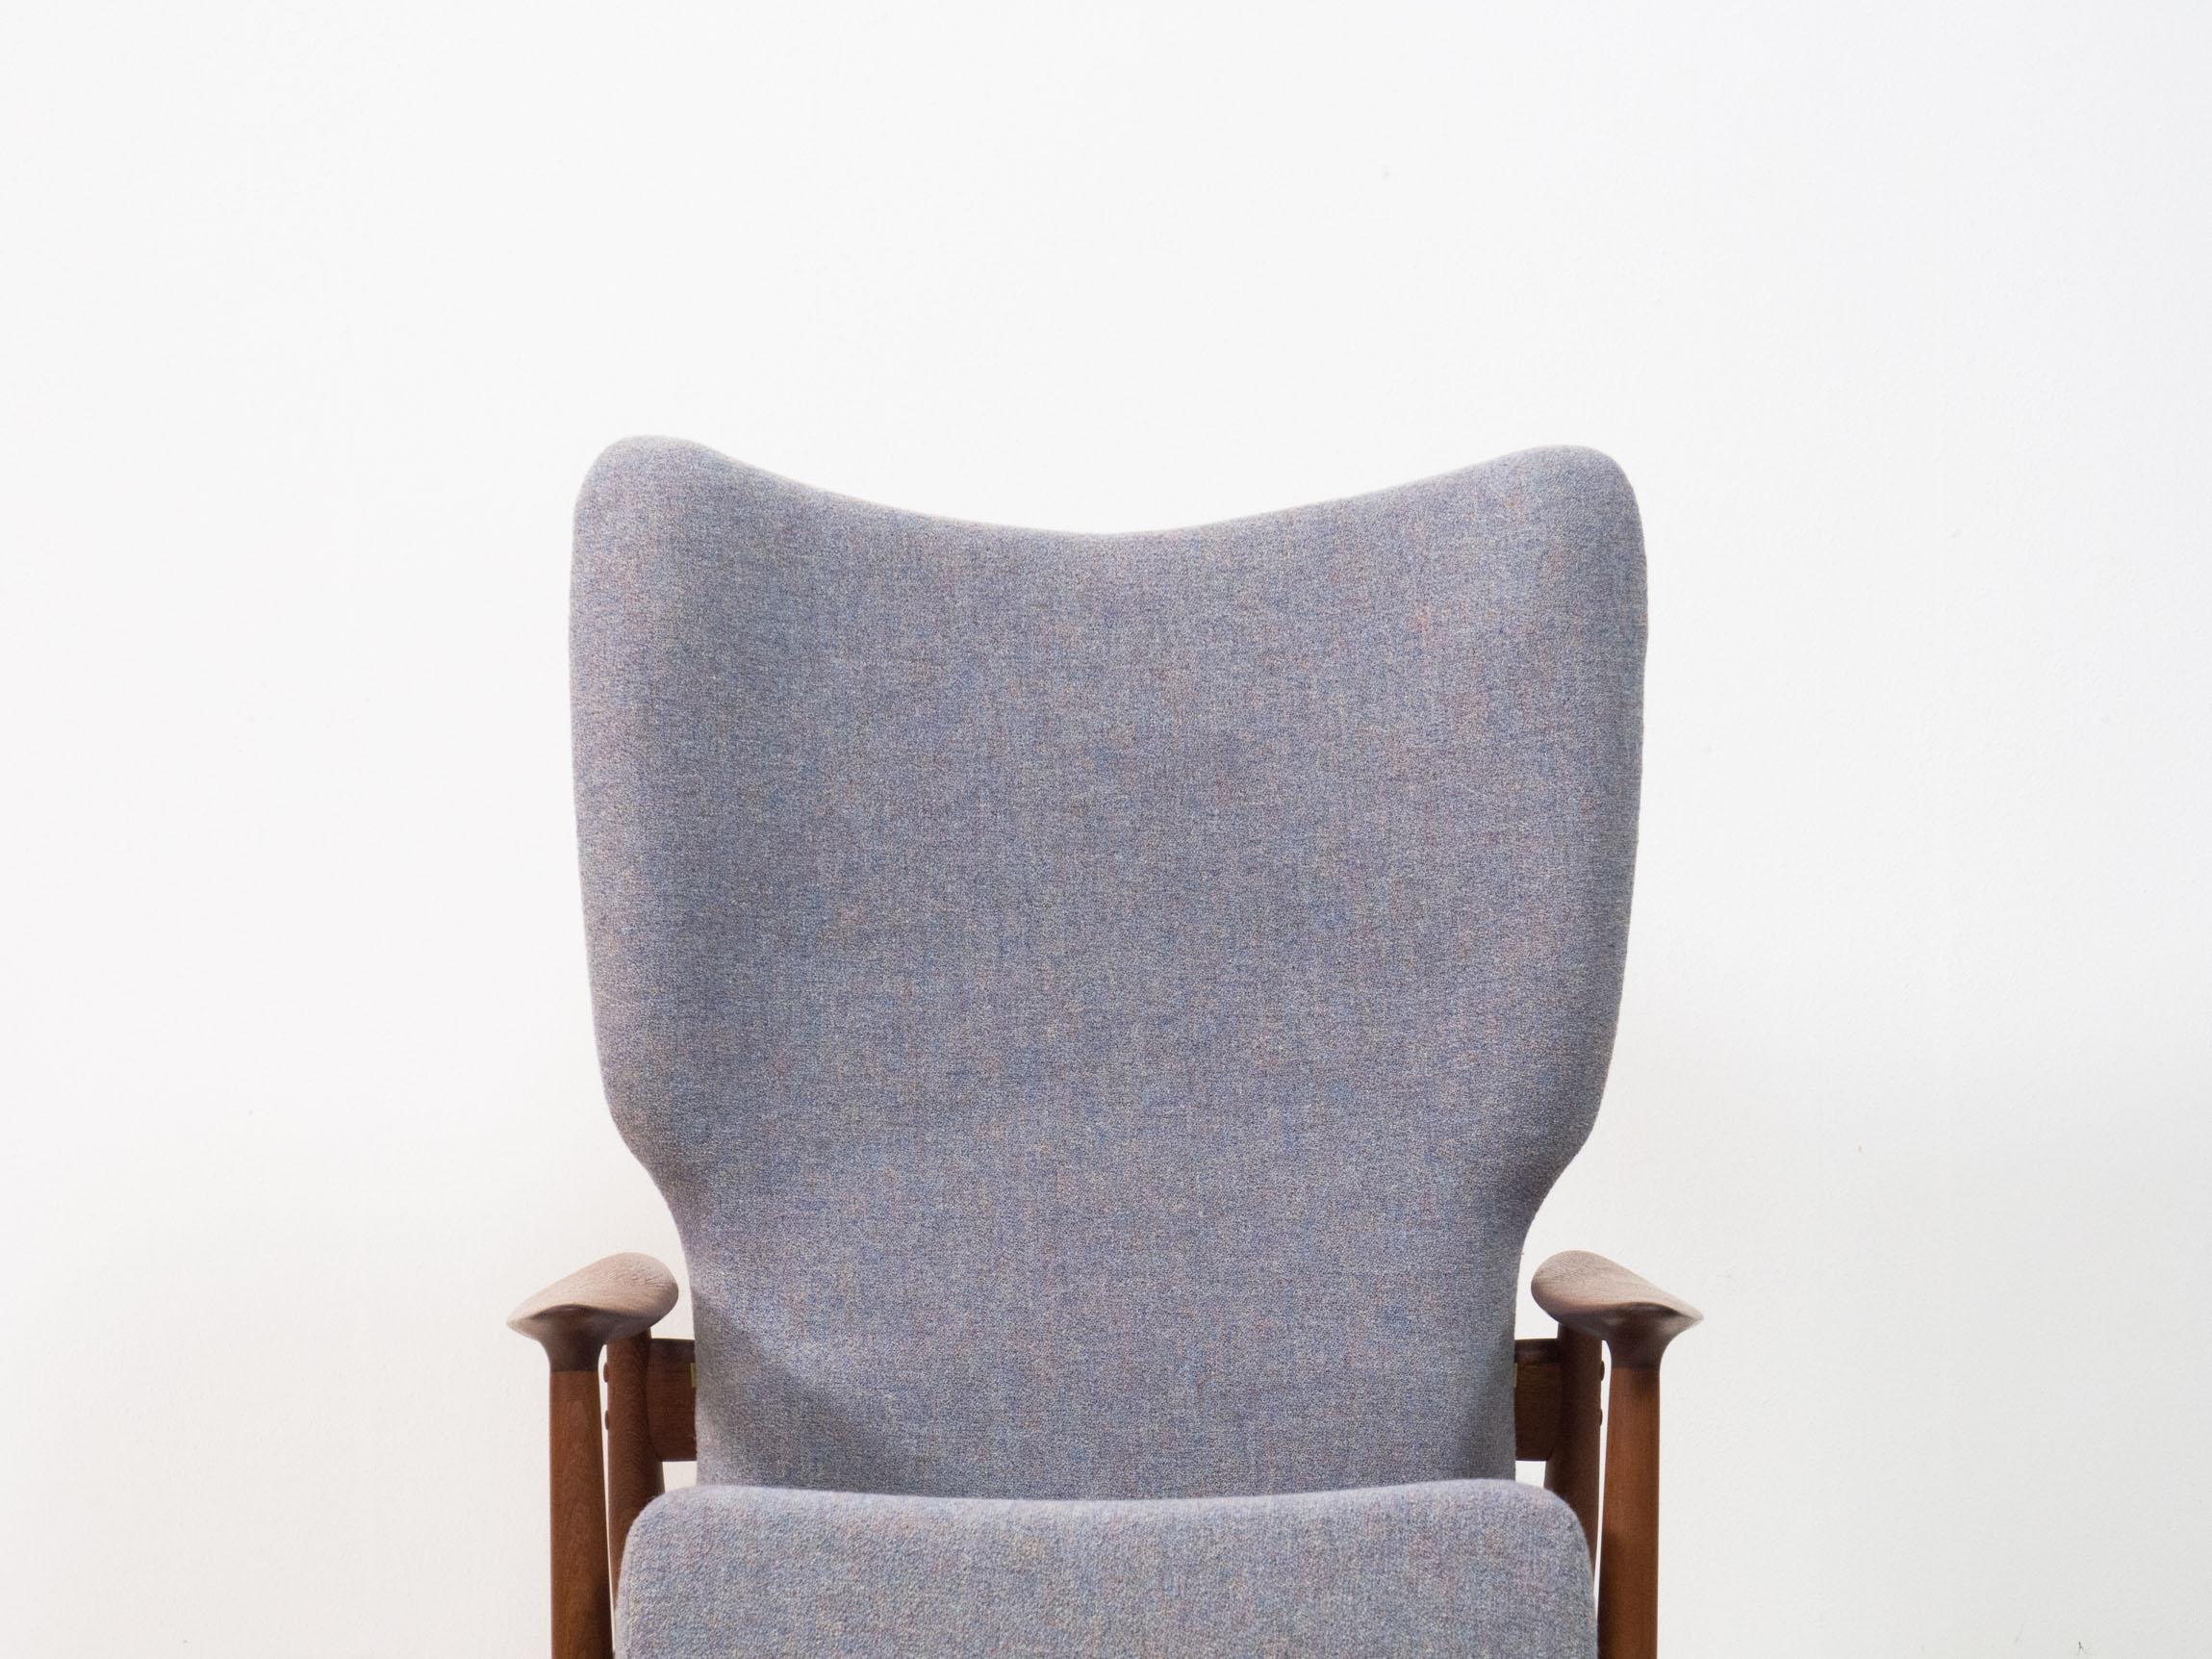 Wing back lounge chair designed by K. Rasmussen for Peter Wessel of Norway, 1960s.

This lounge chair has a solid teak frame and is newly upholstered in a blue/gray wool fabric. It reclines using two brass swivel mechanisms attached to the back. The